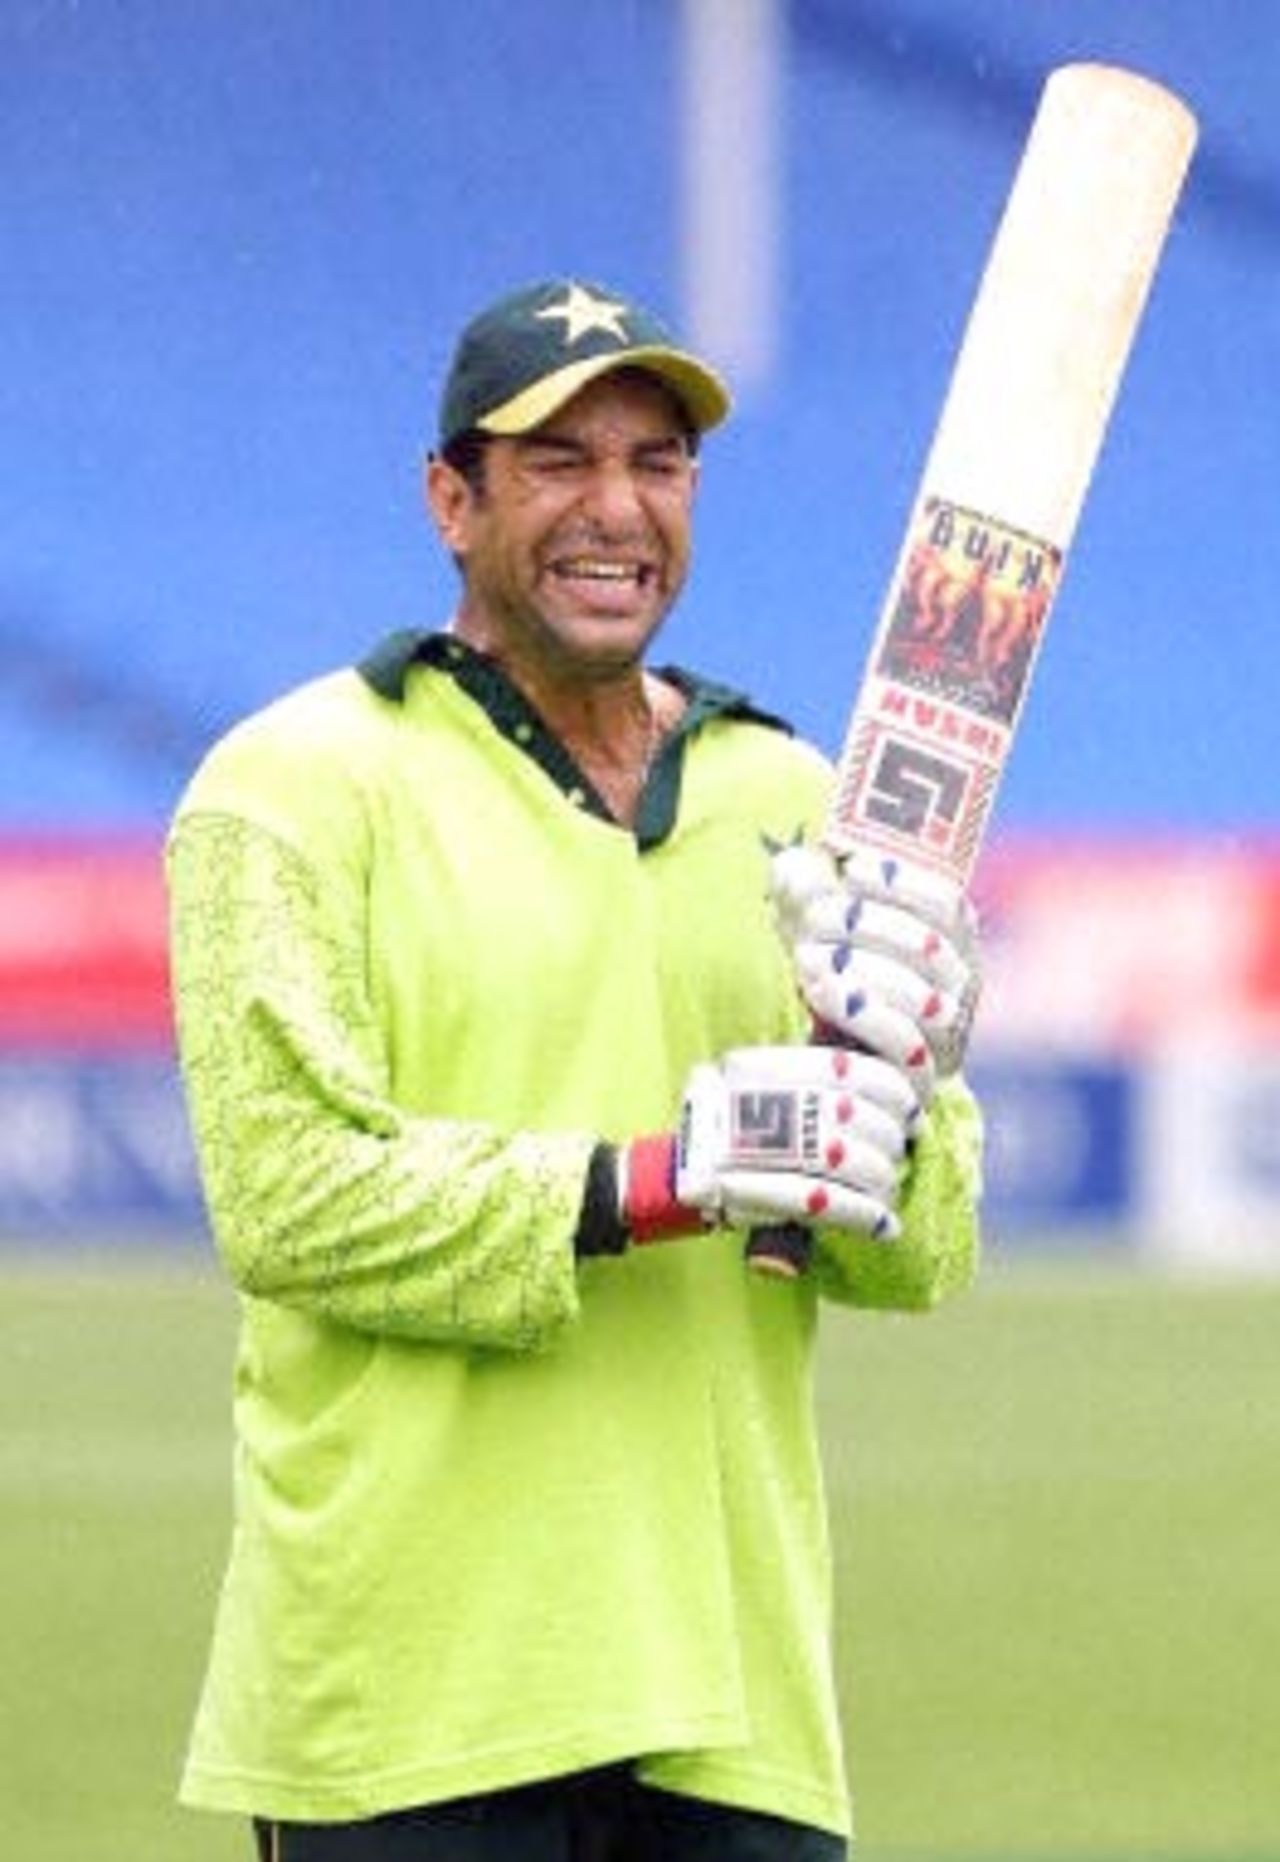 Pakistani cricket player Wasim Akram grimaces as the rain gets heavier during a light training session for the Pakistan cricket team at Eden Park in Auckland 16 February 2001. Pakistan will play New Zealand's Black Caps in the first of five one-day internationals starting 17 February.